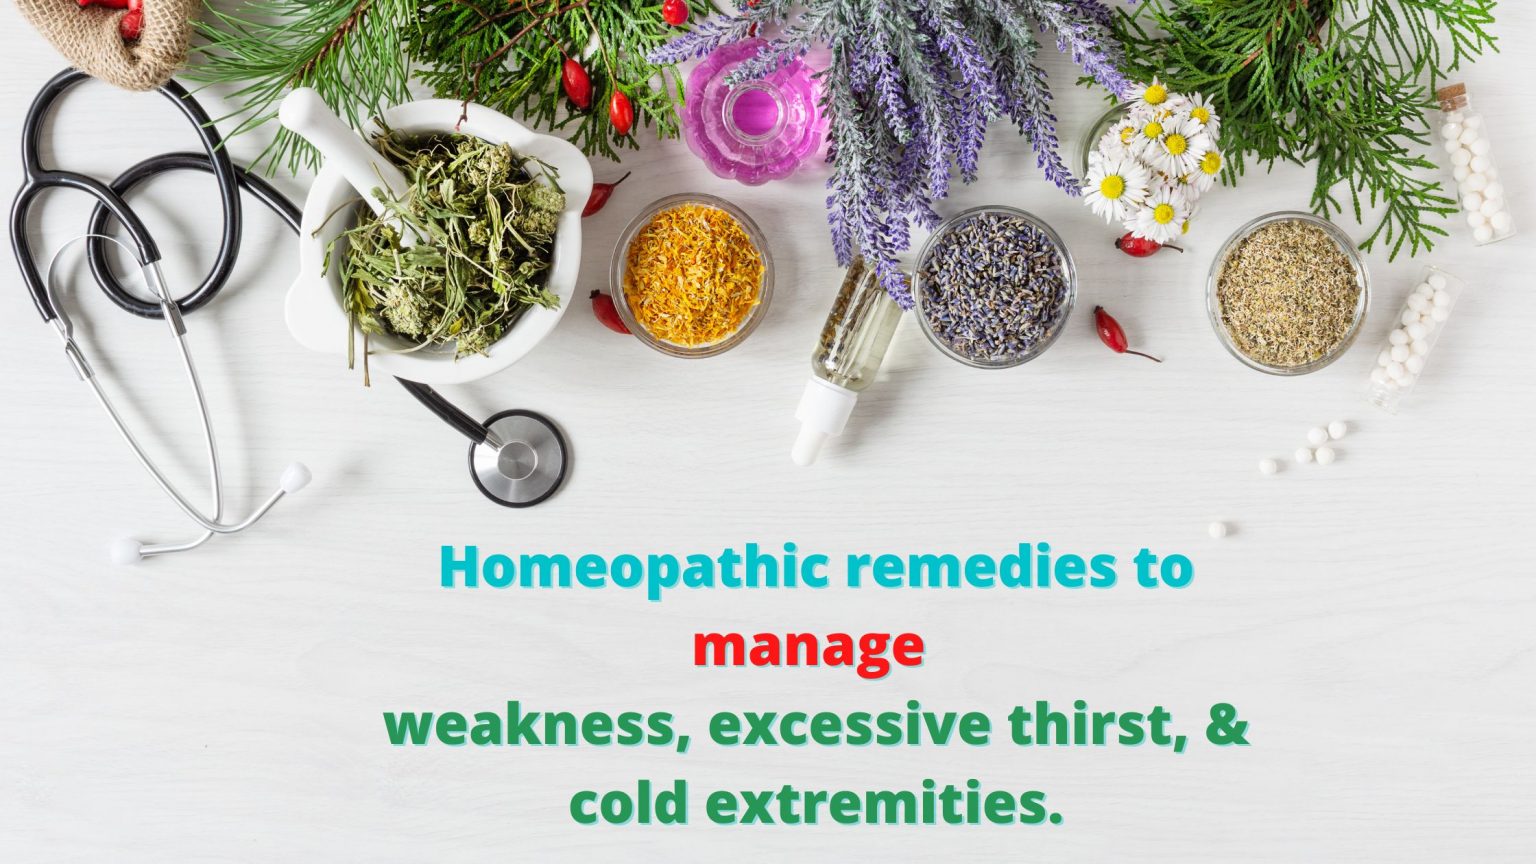 Homeopathic remedies to manage weakness